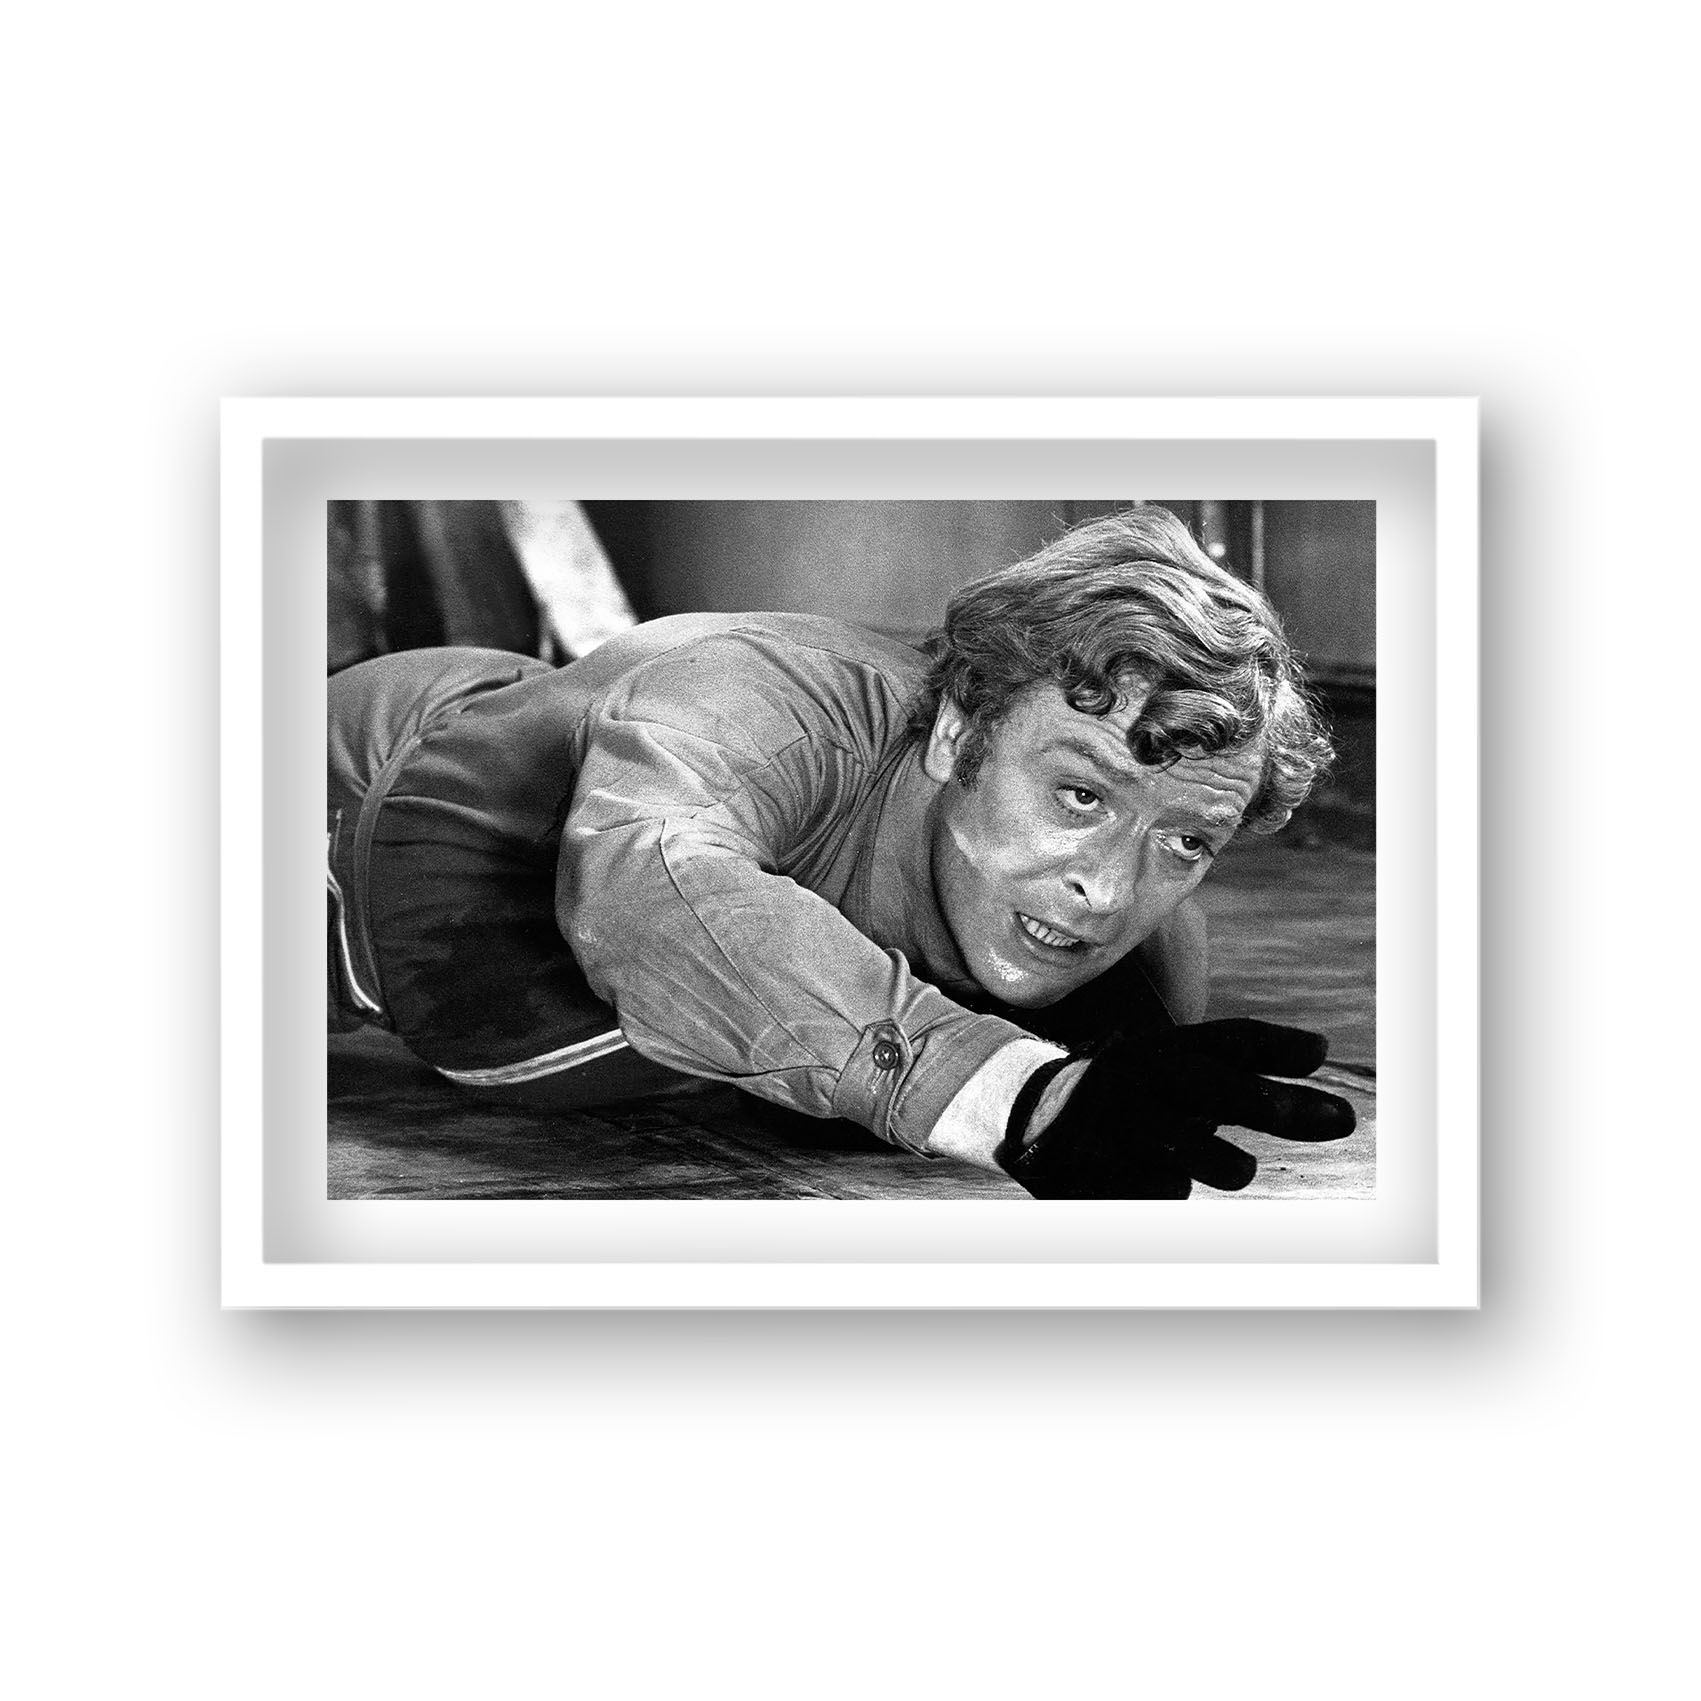 Michael Caine as Charlie Croker in Scene From the Italian Job 1969 Vintage Icon Print